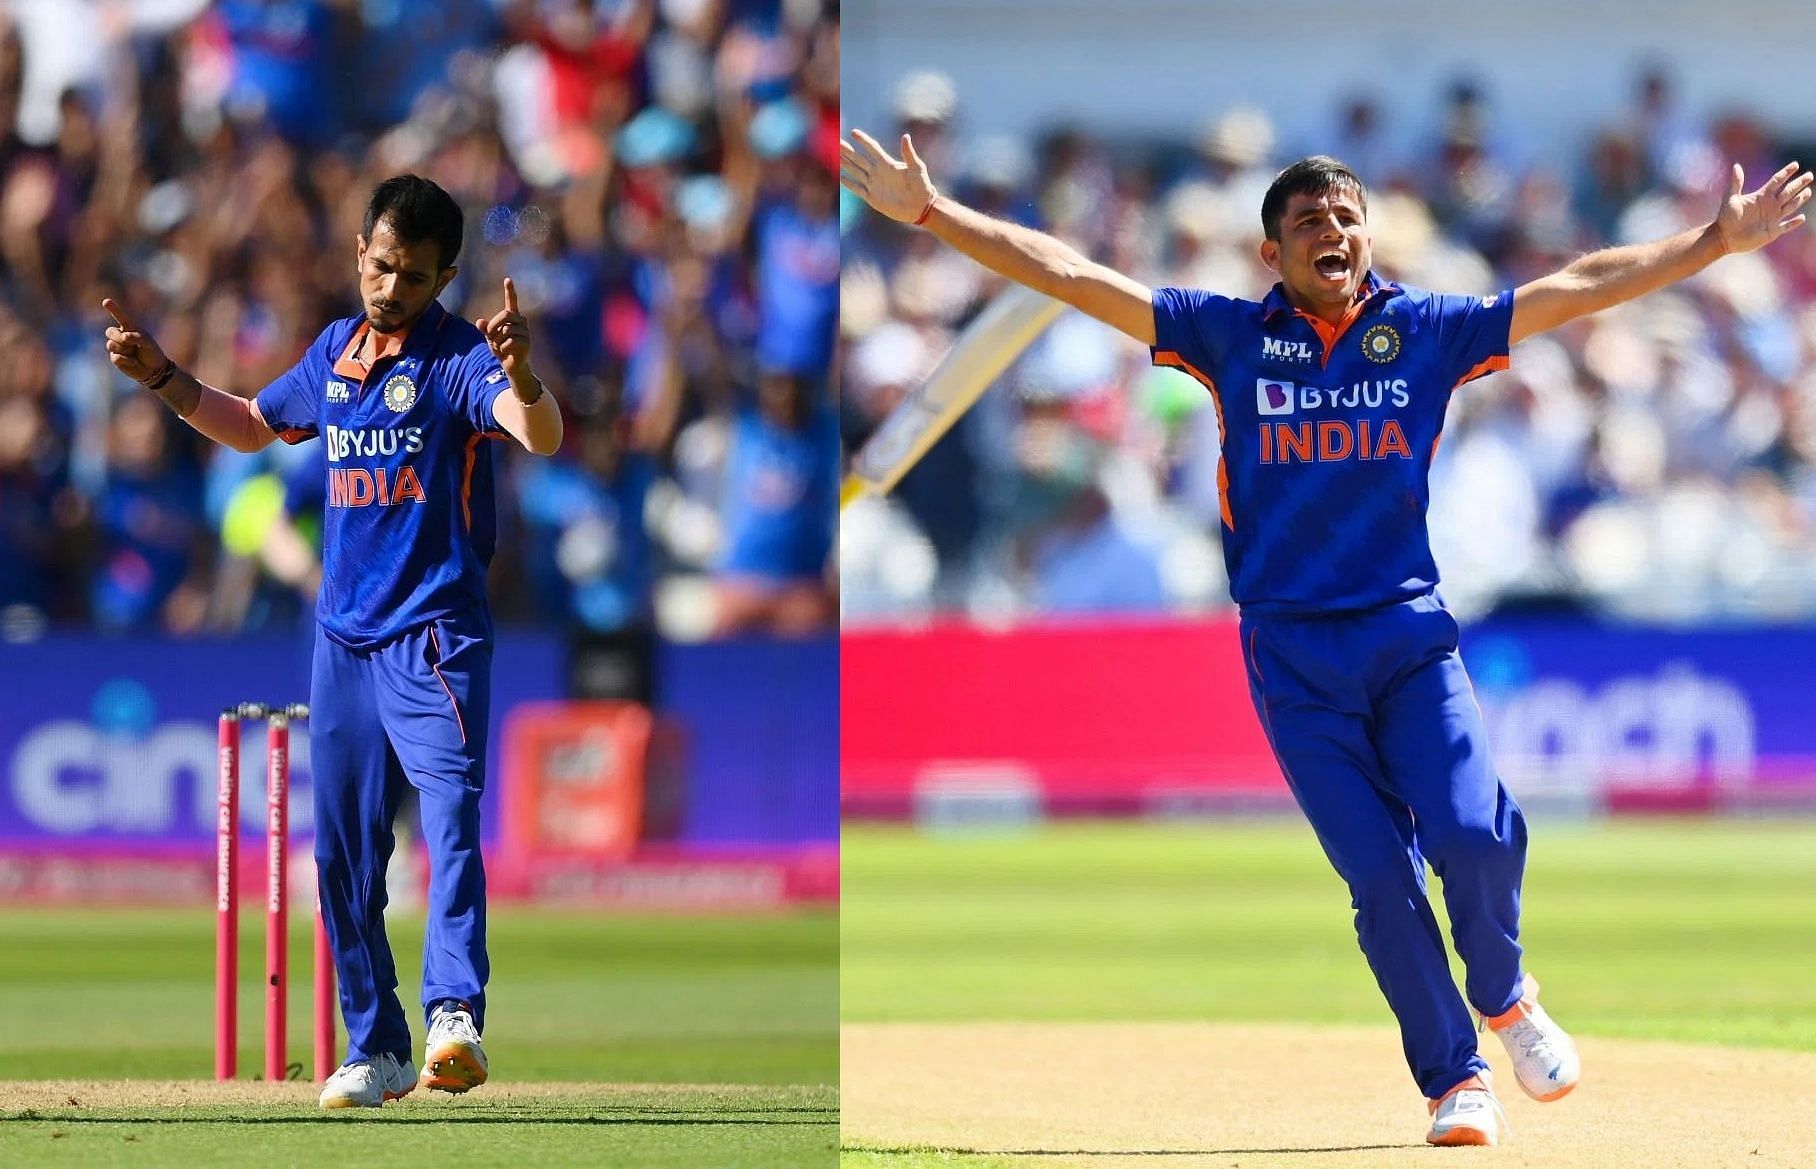 Yuzvendra Chahal and Ravi Bishnoi are the two wrist-spinners picked for the Asia Cup